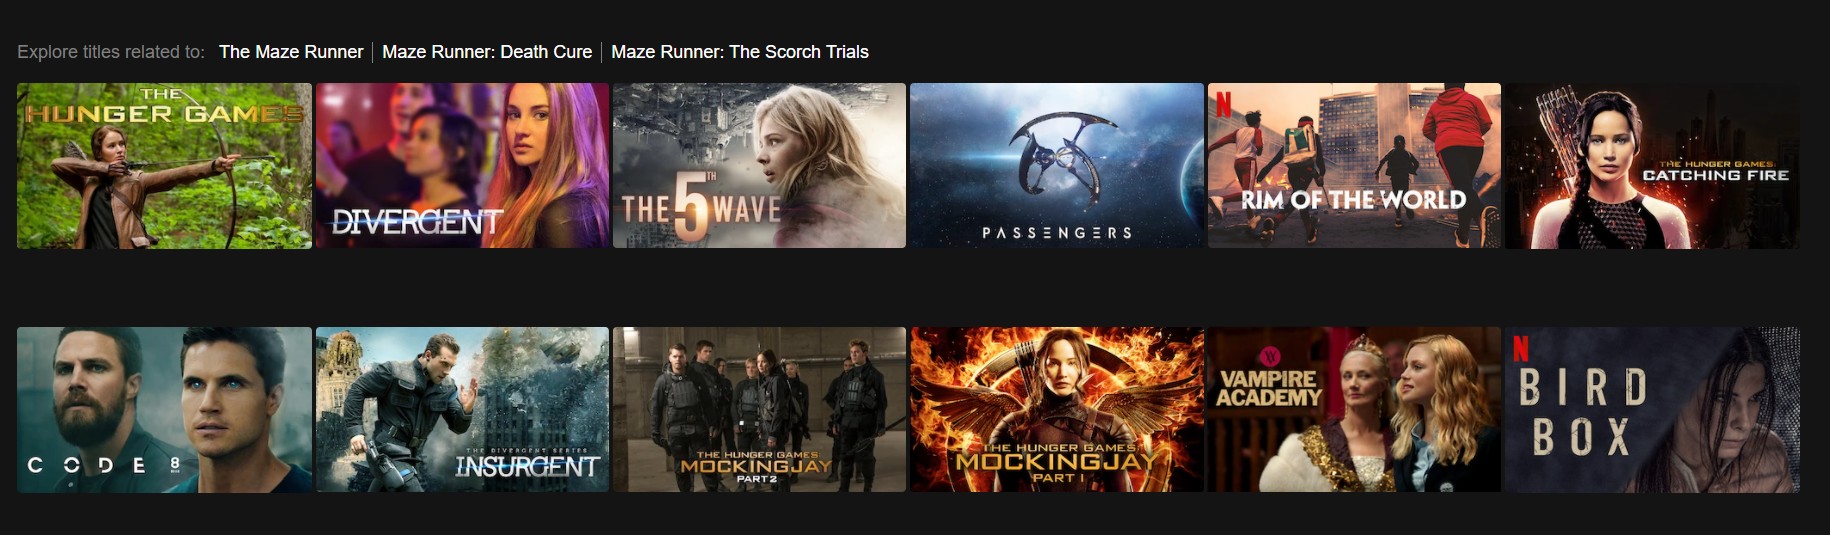 All The Maze Runner movies in order and where to watch them 